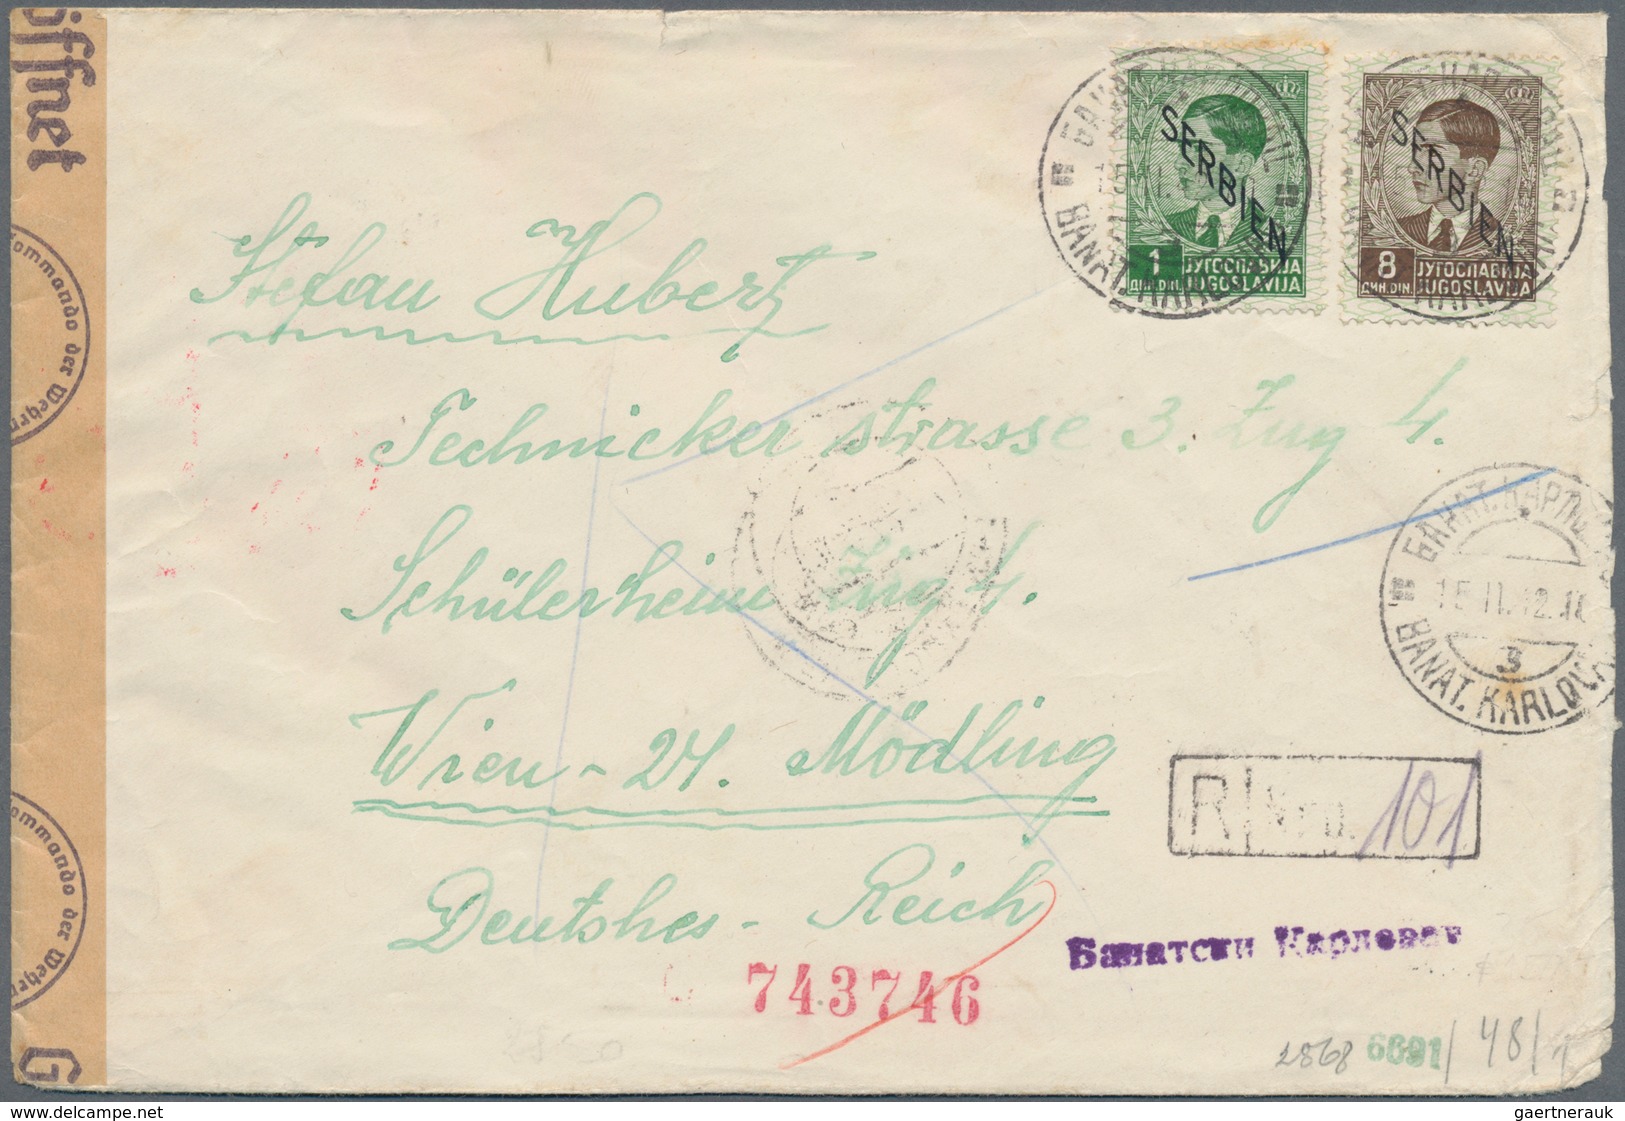 Serbien: 1865/1944 interesting lot of mostly better pieces, incl. letters, postal stationaries, unit